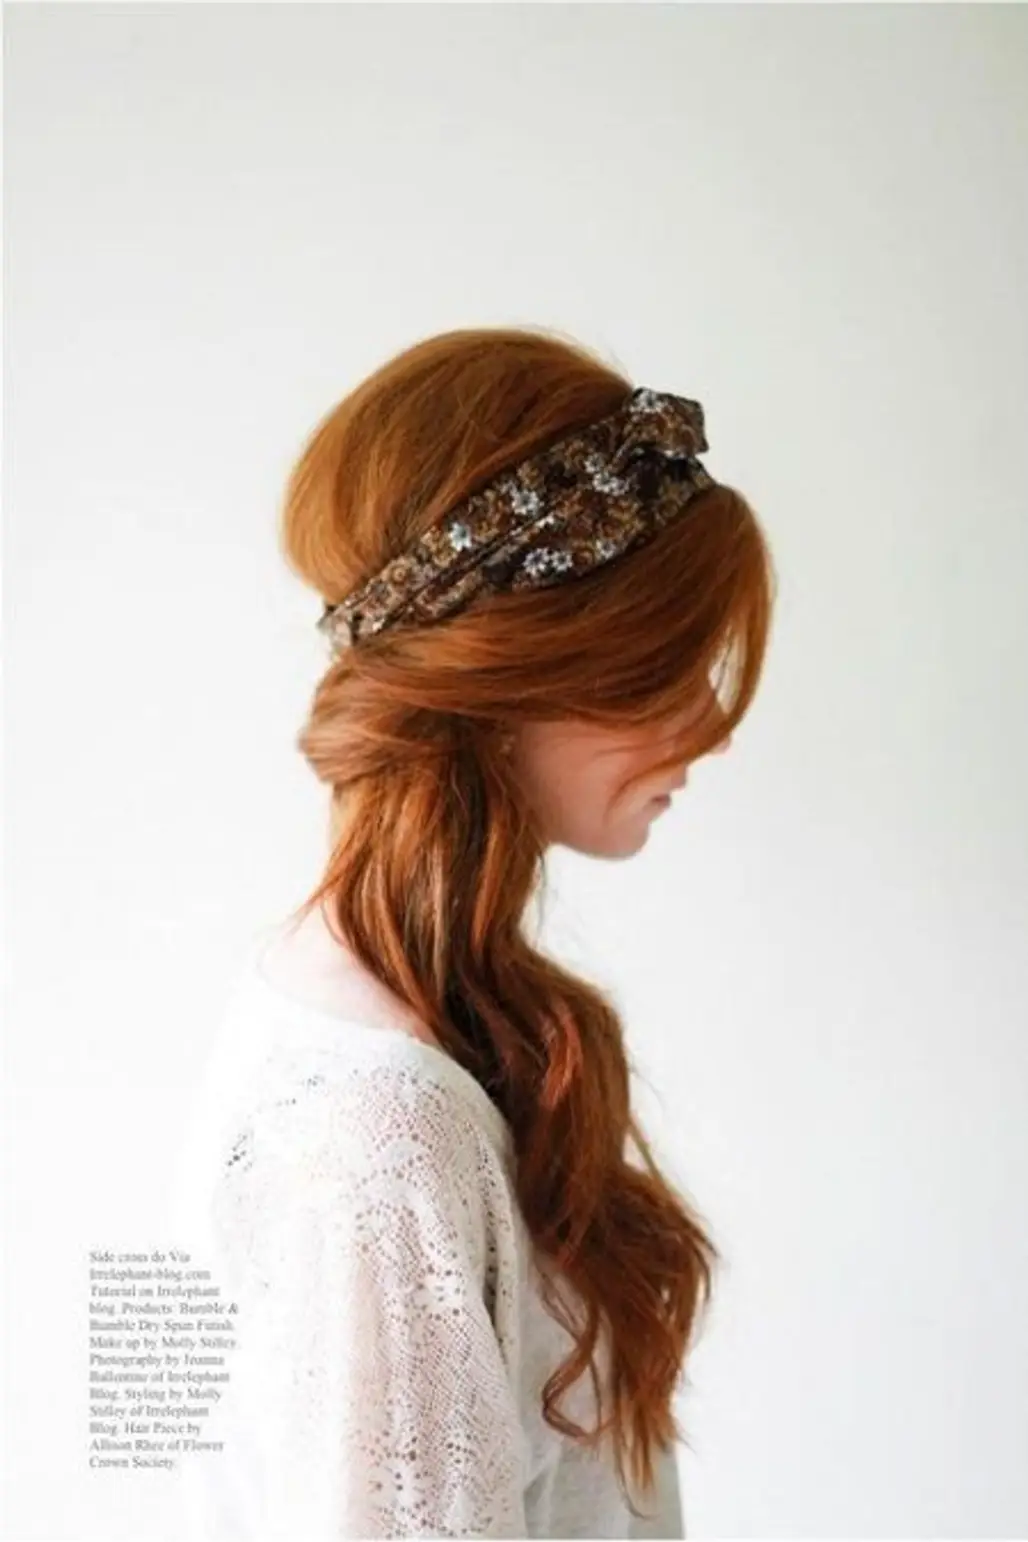 hair,clothing,bridal accessory,fashion accessory,hairstyle,